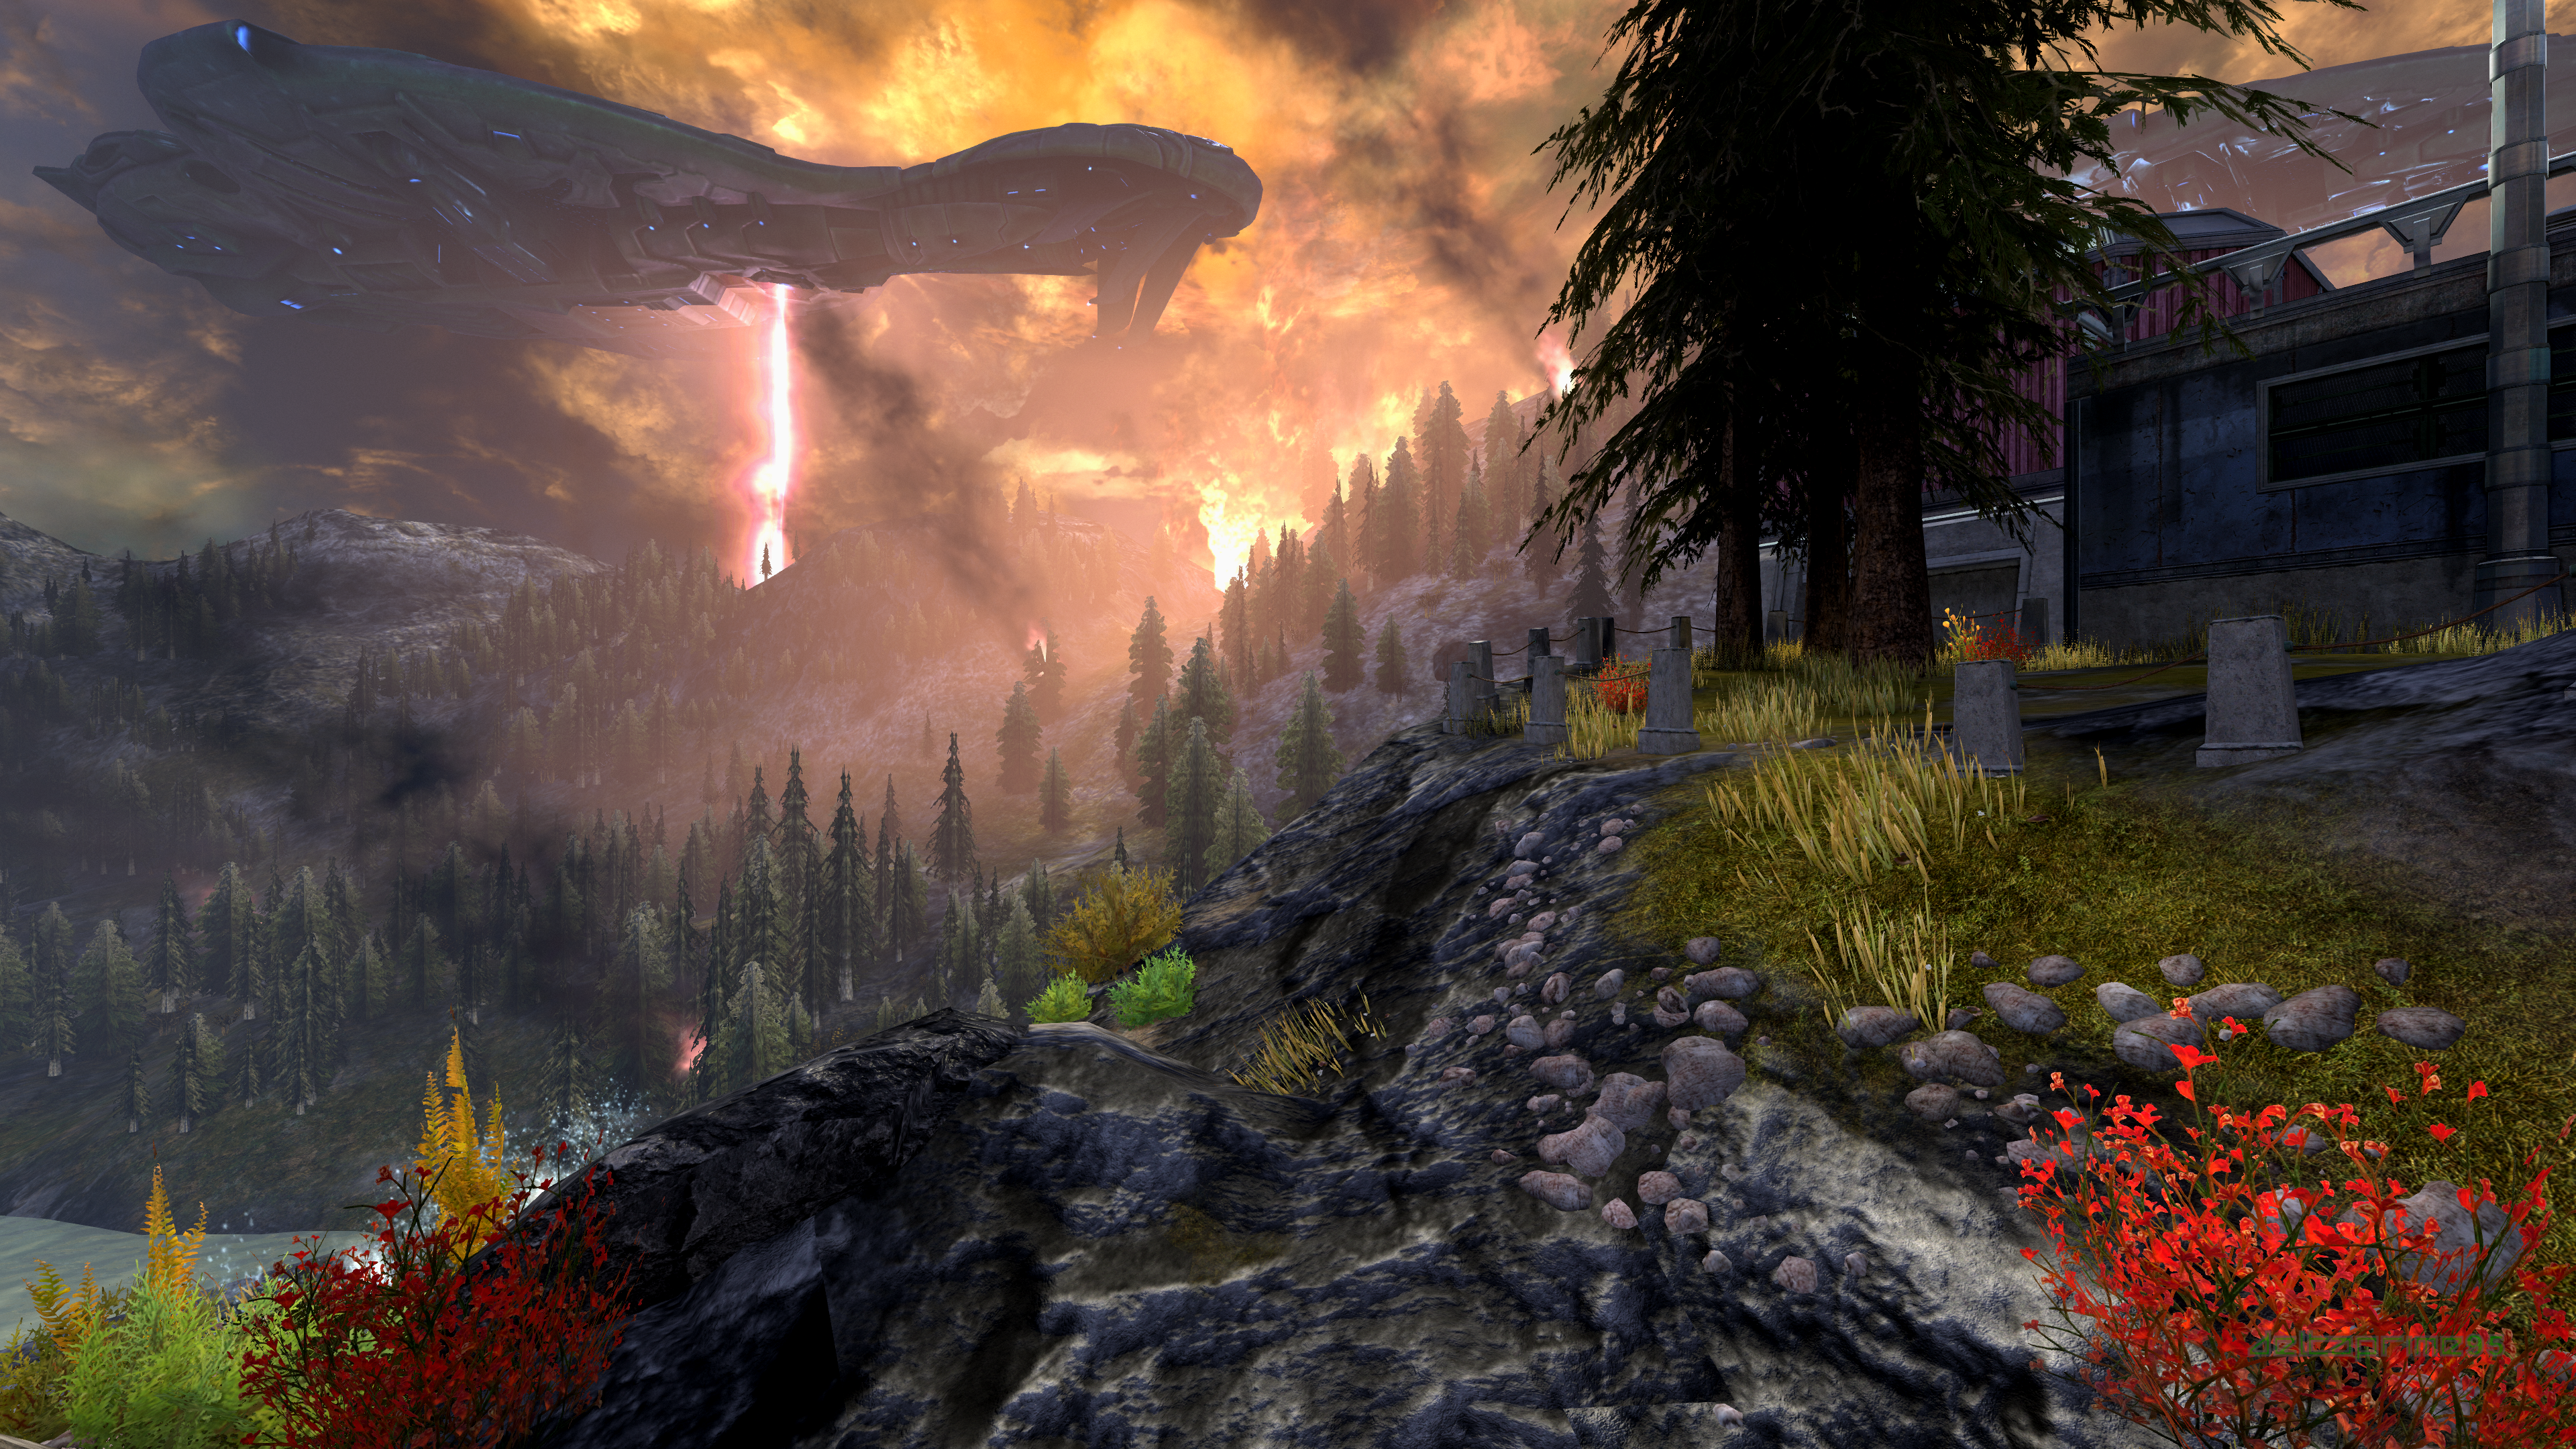 In Game Halo Reach PC Gaming Planet Reach Destruction Fire Covenant Battlecruiser Glassing Highlands 3840x2160